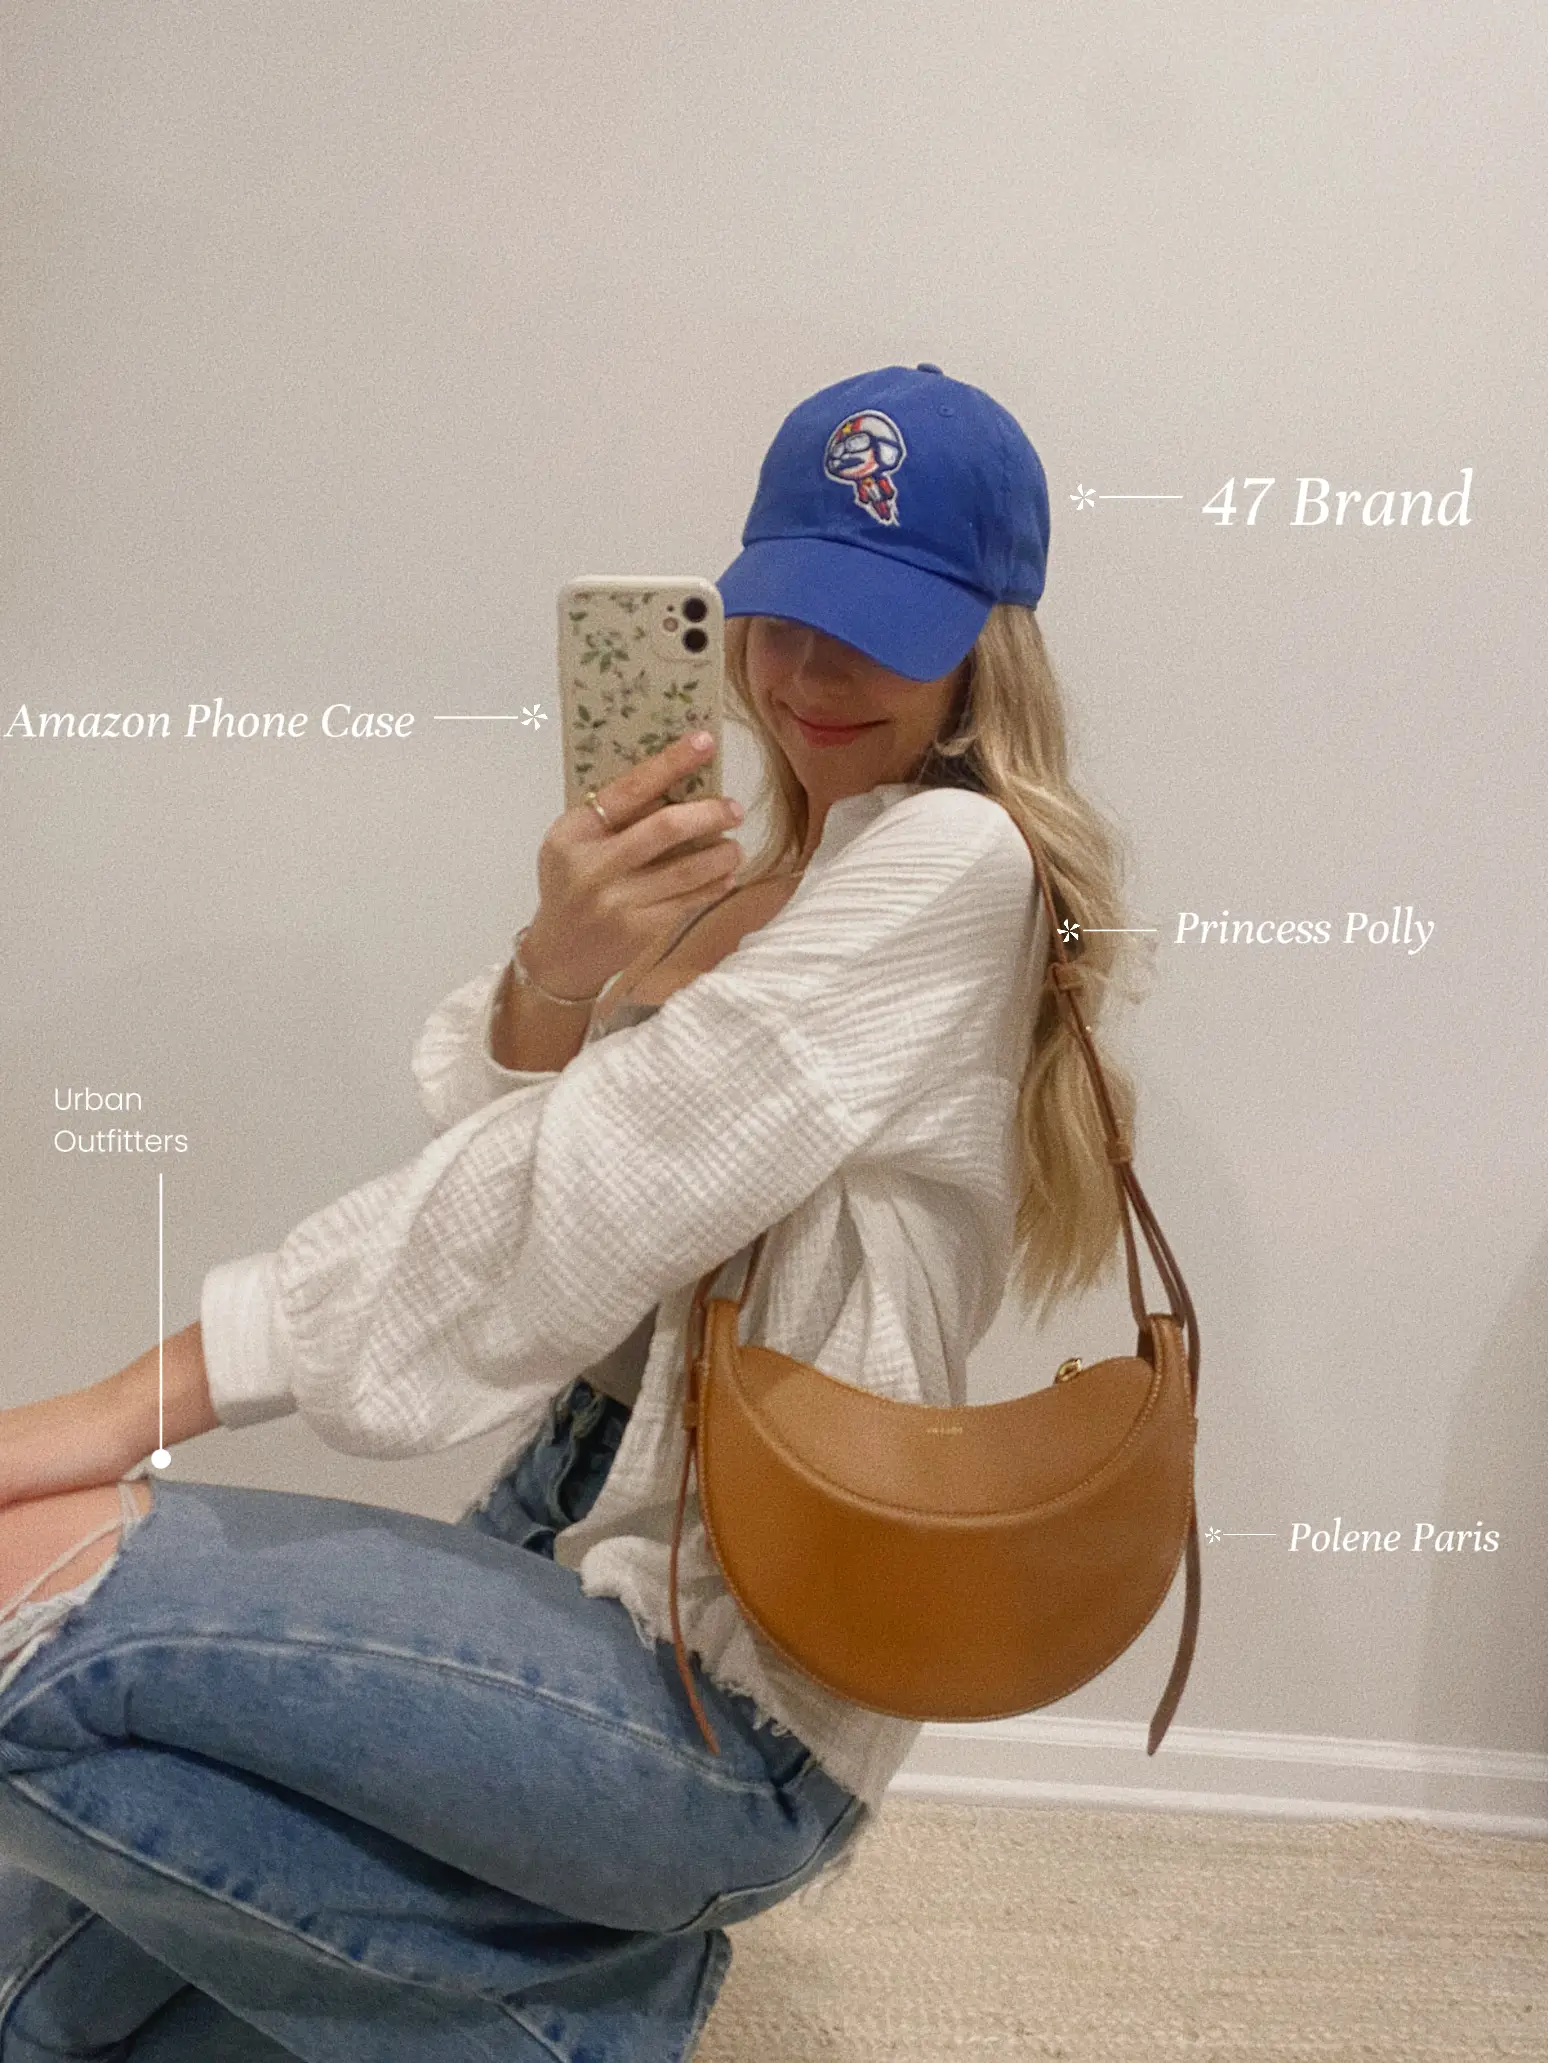 Baseball Game Outfit Inspo ⚾️, Gallery posted by Isabelle ✨